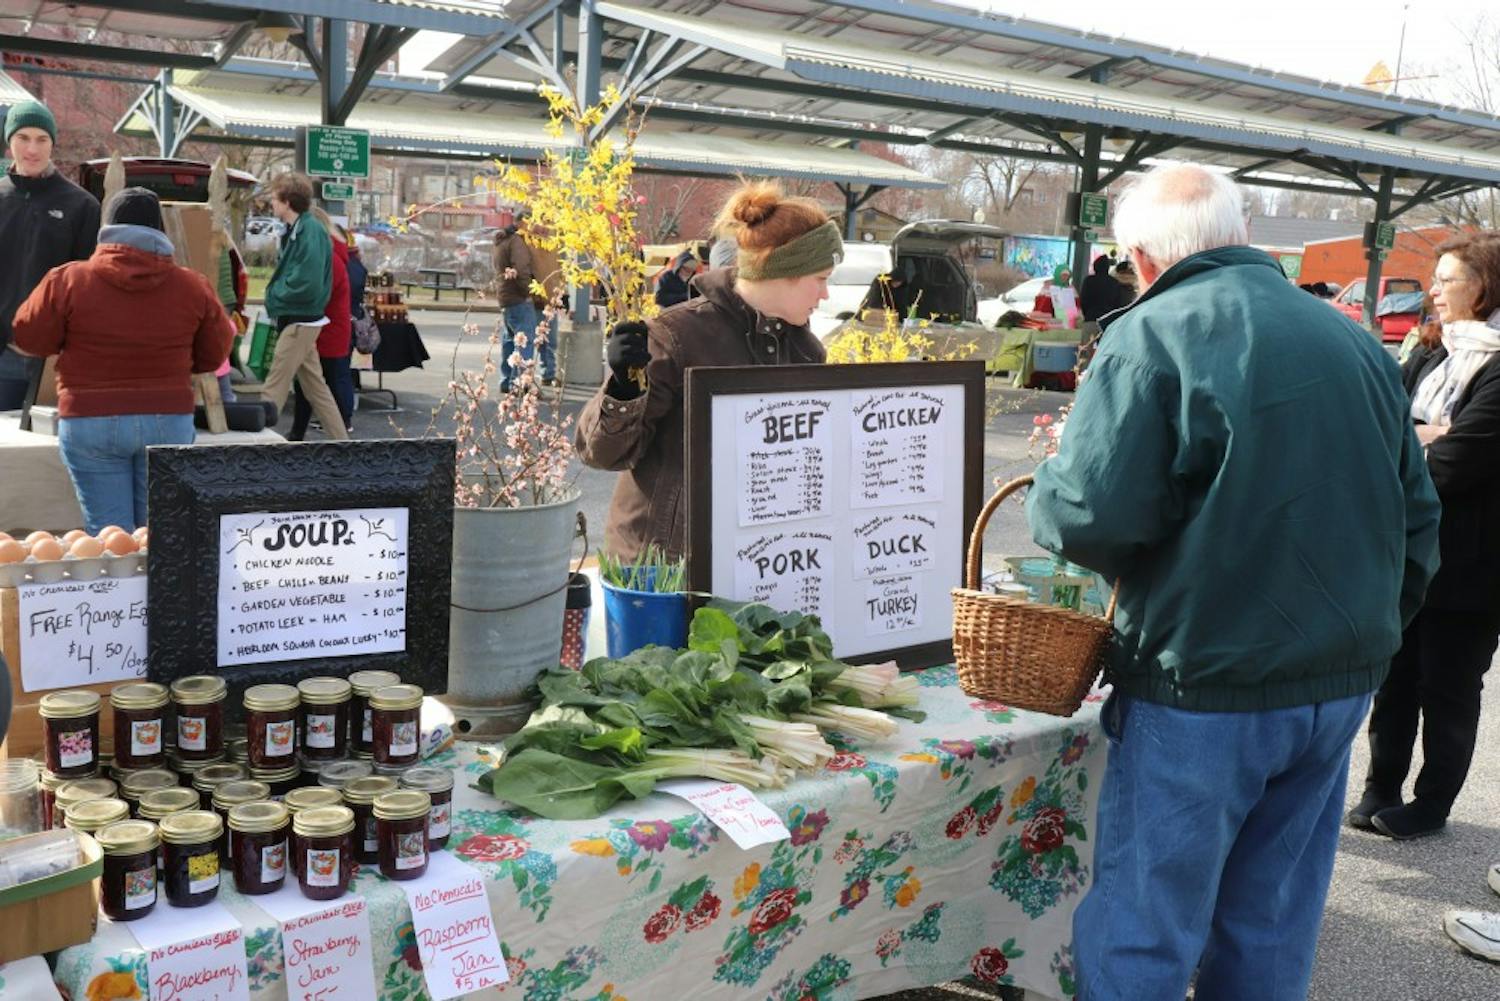 GALLERY: The return of the Bloomington Community Farmers' Market